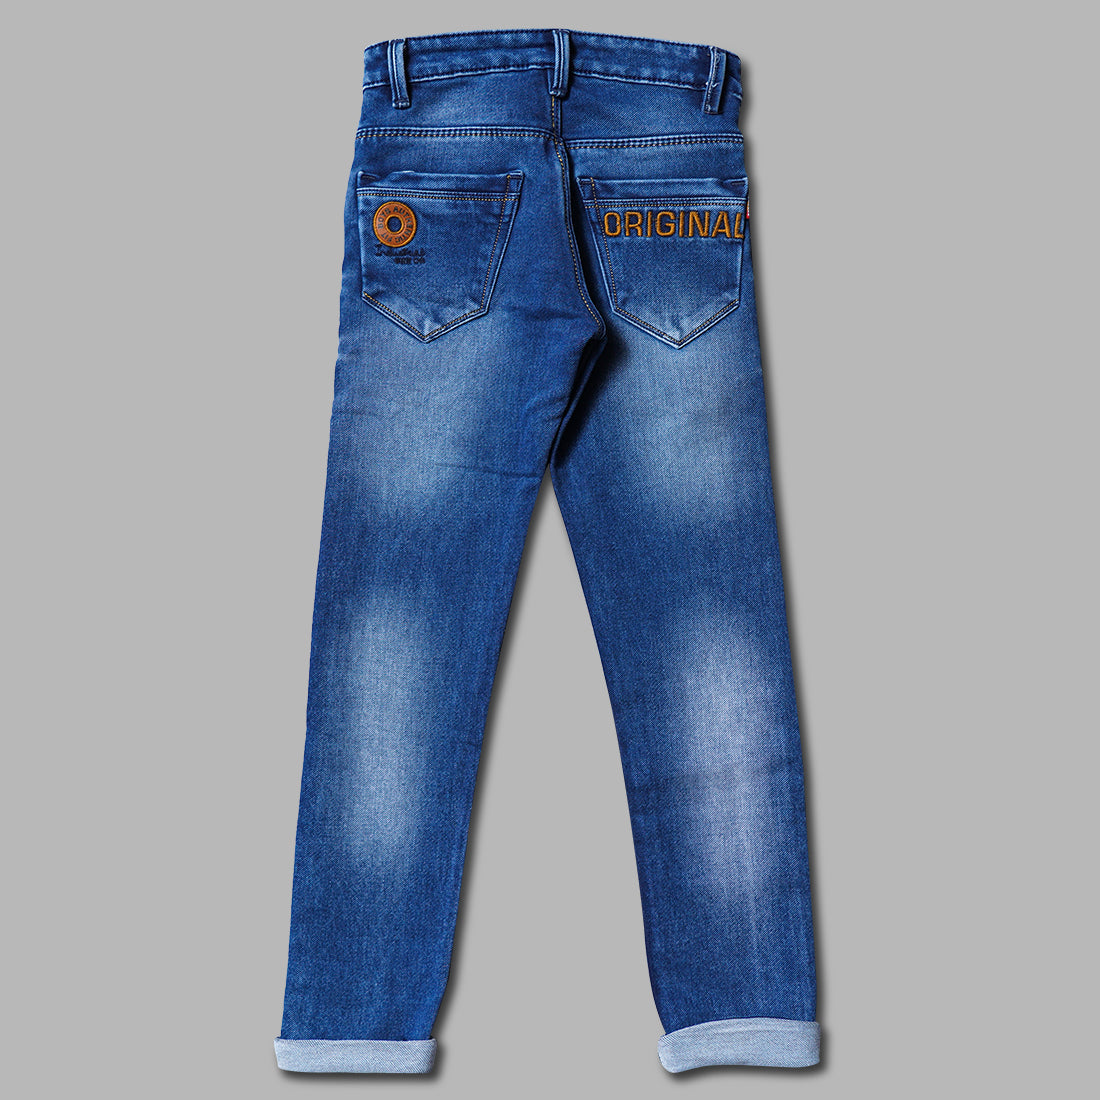 Blue Blanket Jeans, 100% made in Italy top quality jeans and clothing –  Blueblanketjeans